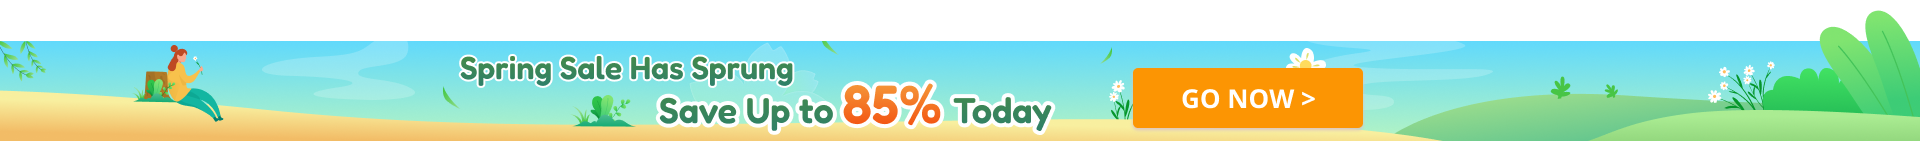 Spring Sale Has Sprung Save Up to 85% Today